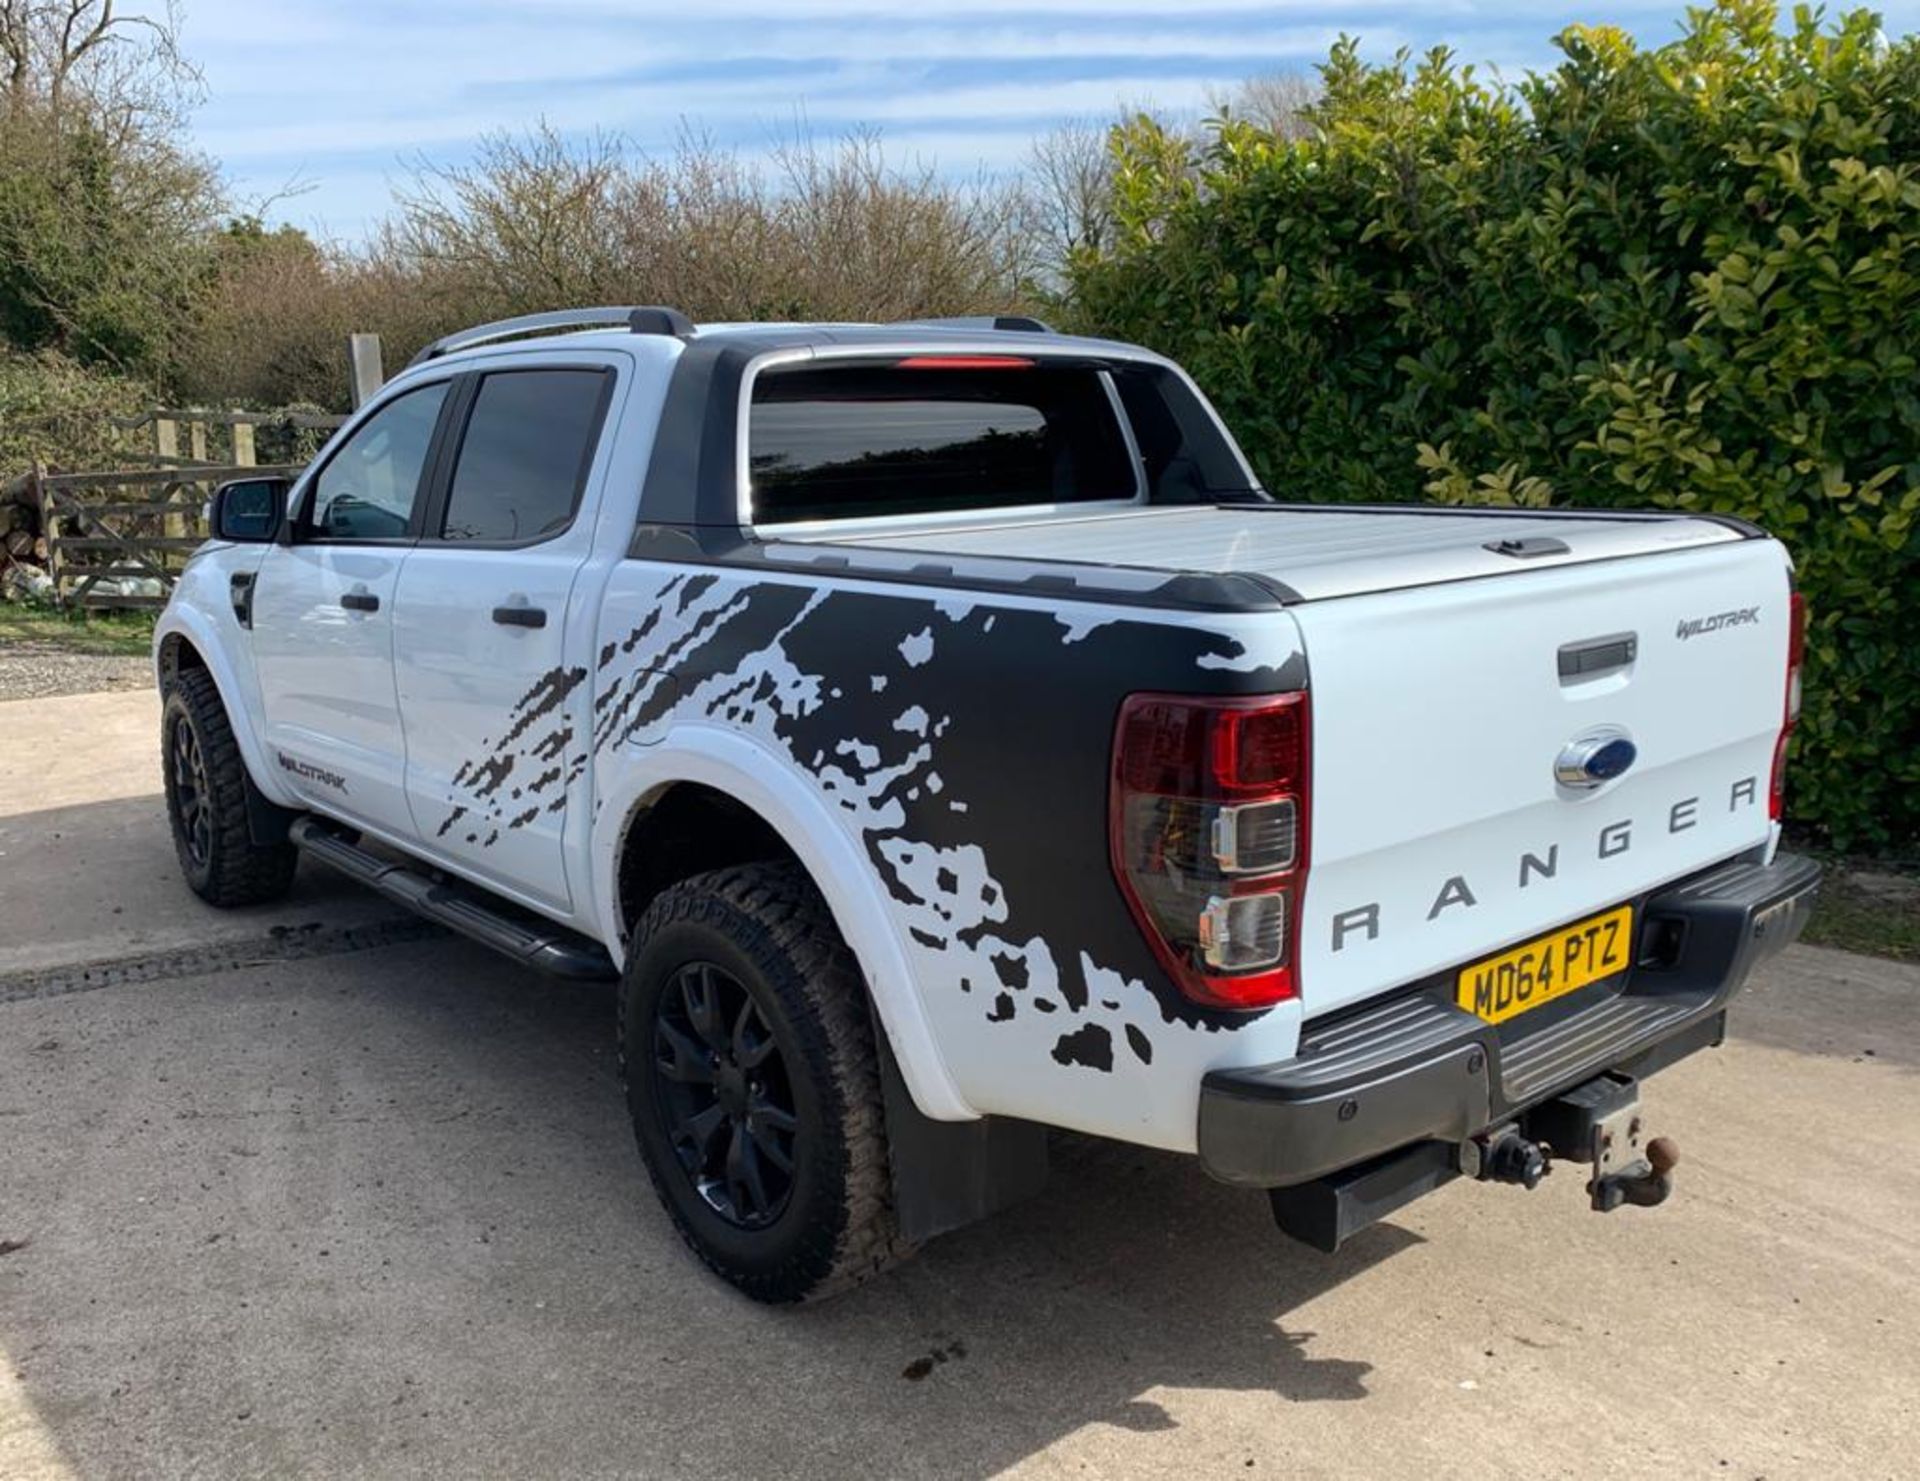 2015/64 REG FORD RANGER WILDTRAK 4X4 WHITE PICK-UP TDCI 3.2L AUTOMATIC, SHOWING 1 FORMER KEEPER - Image 9 of 13